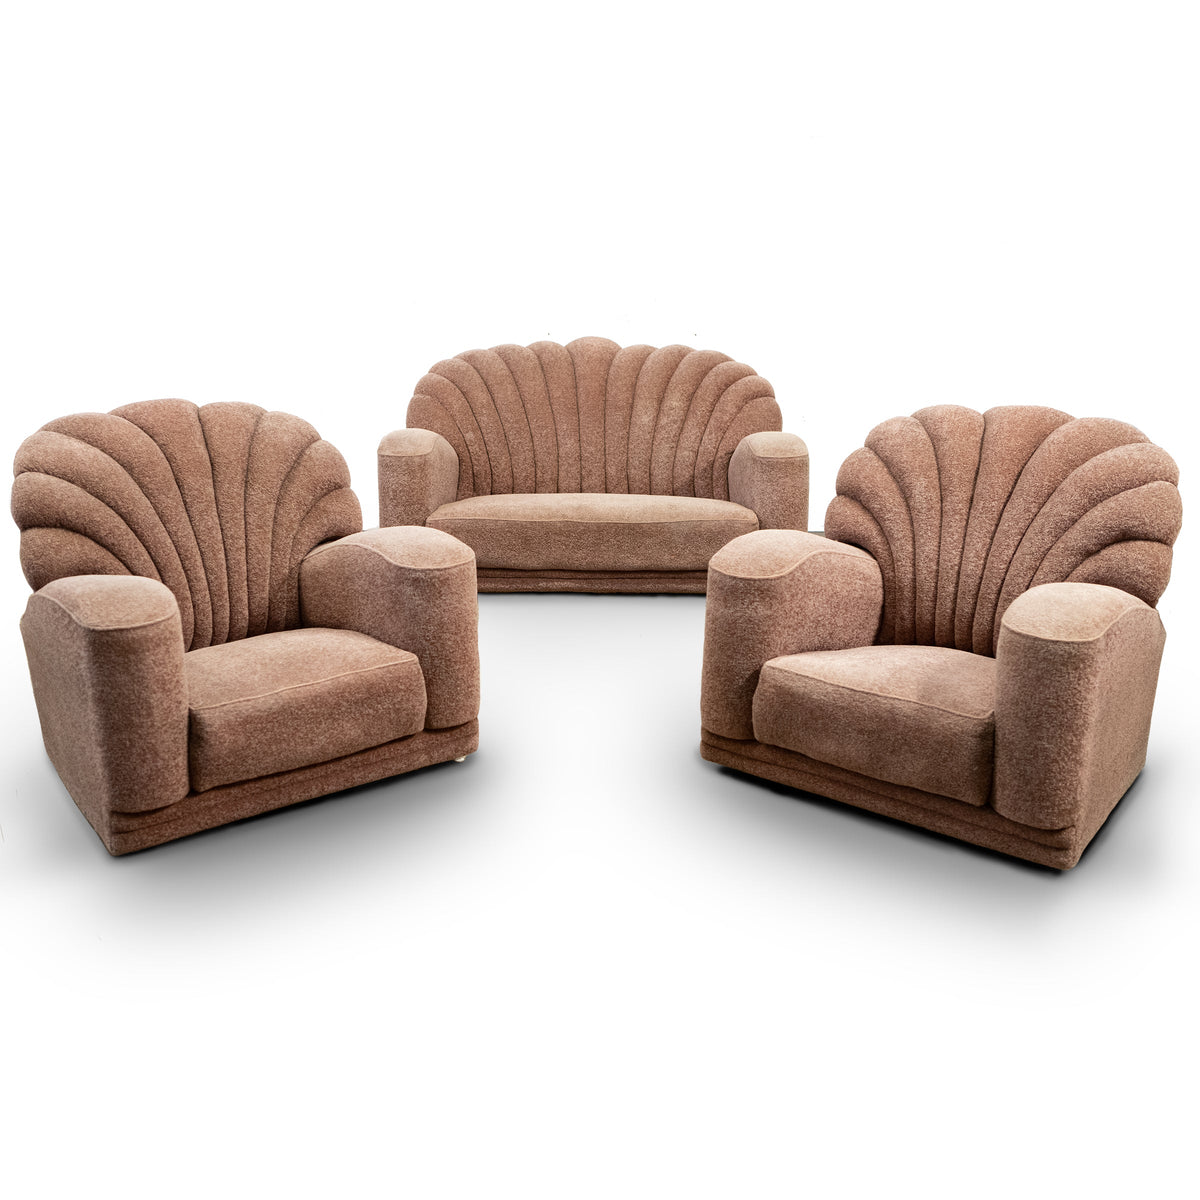 som open haard verbrand Art Deco 3 Piece Suite Shell-Back Sofa & Armchairs - The Architectural Forum